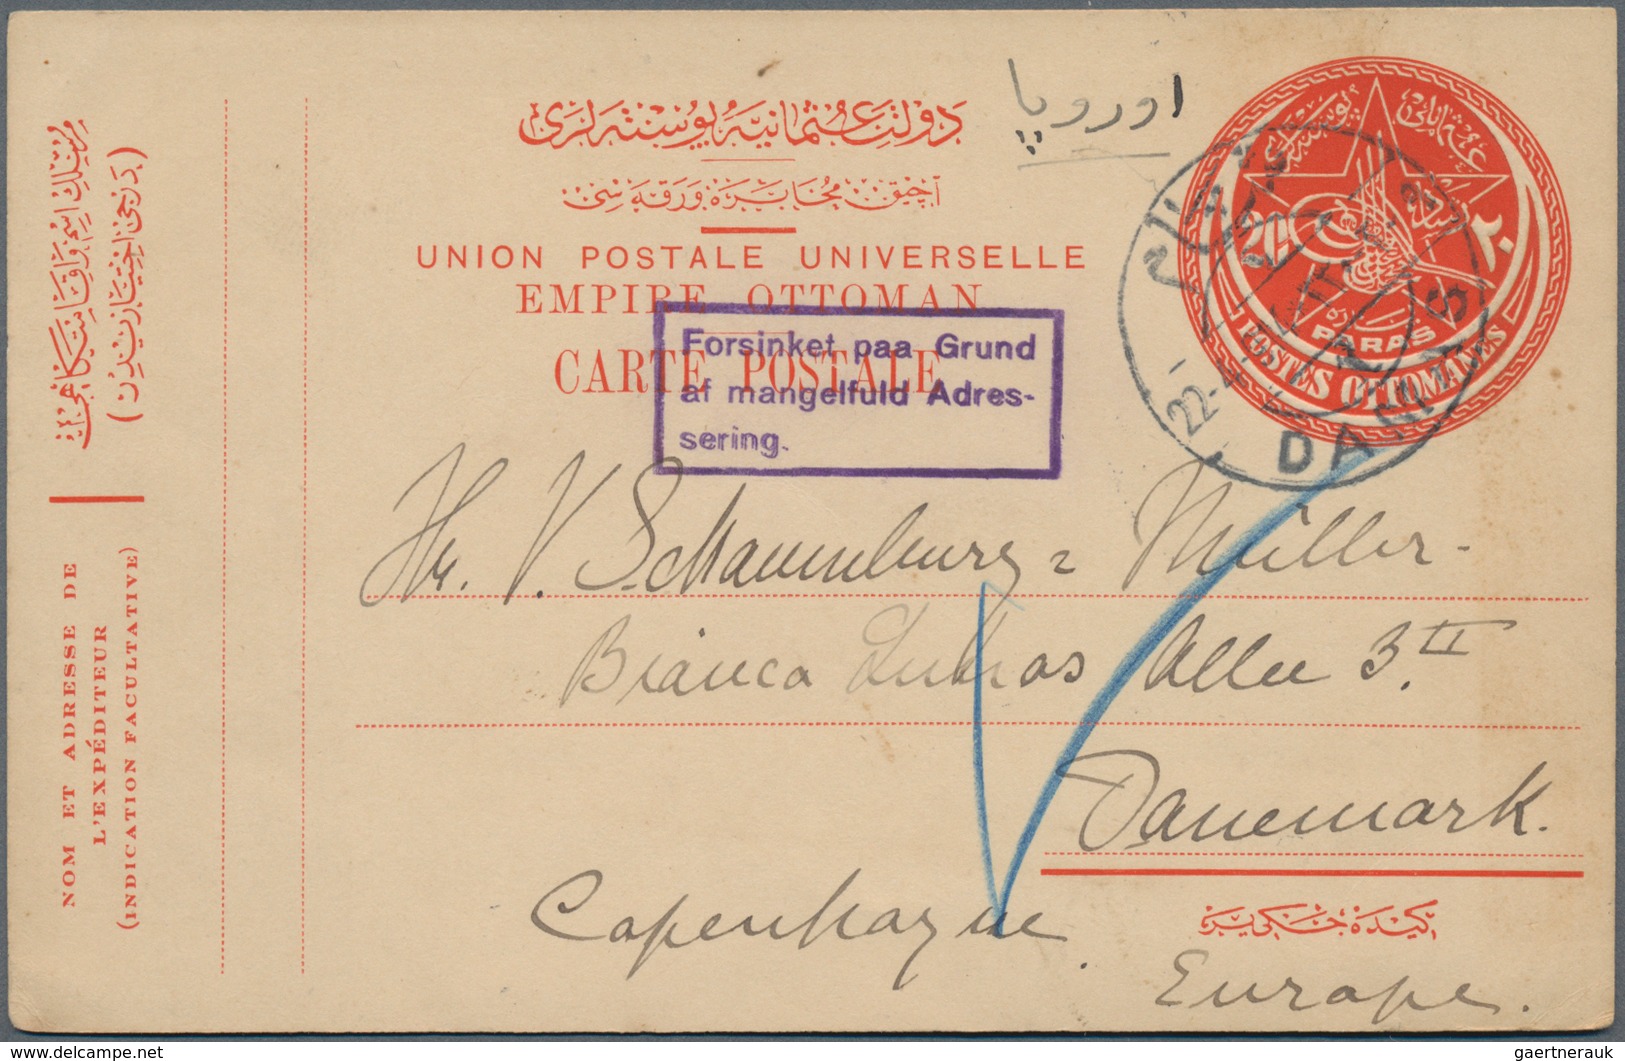 Türkei: 1885/1950, collection of about 53 turkish covers and cards and 38 interesting items from for